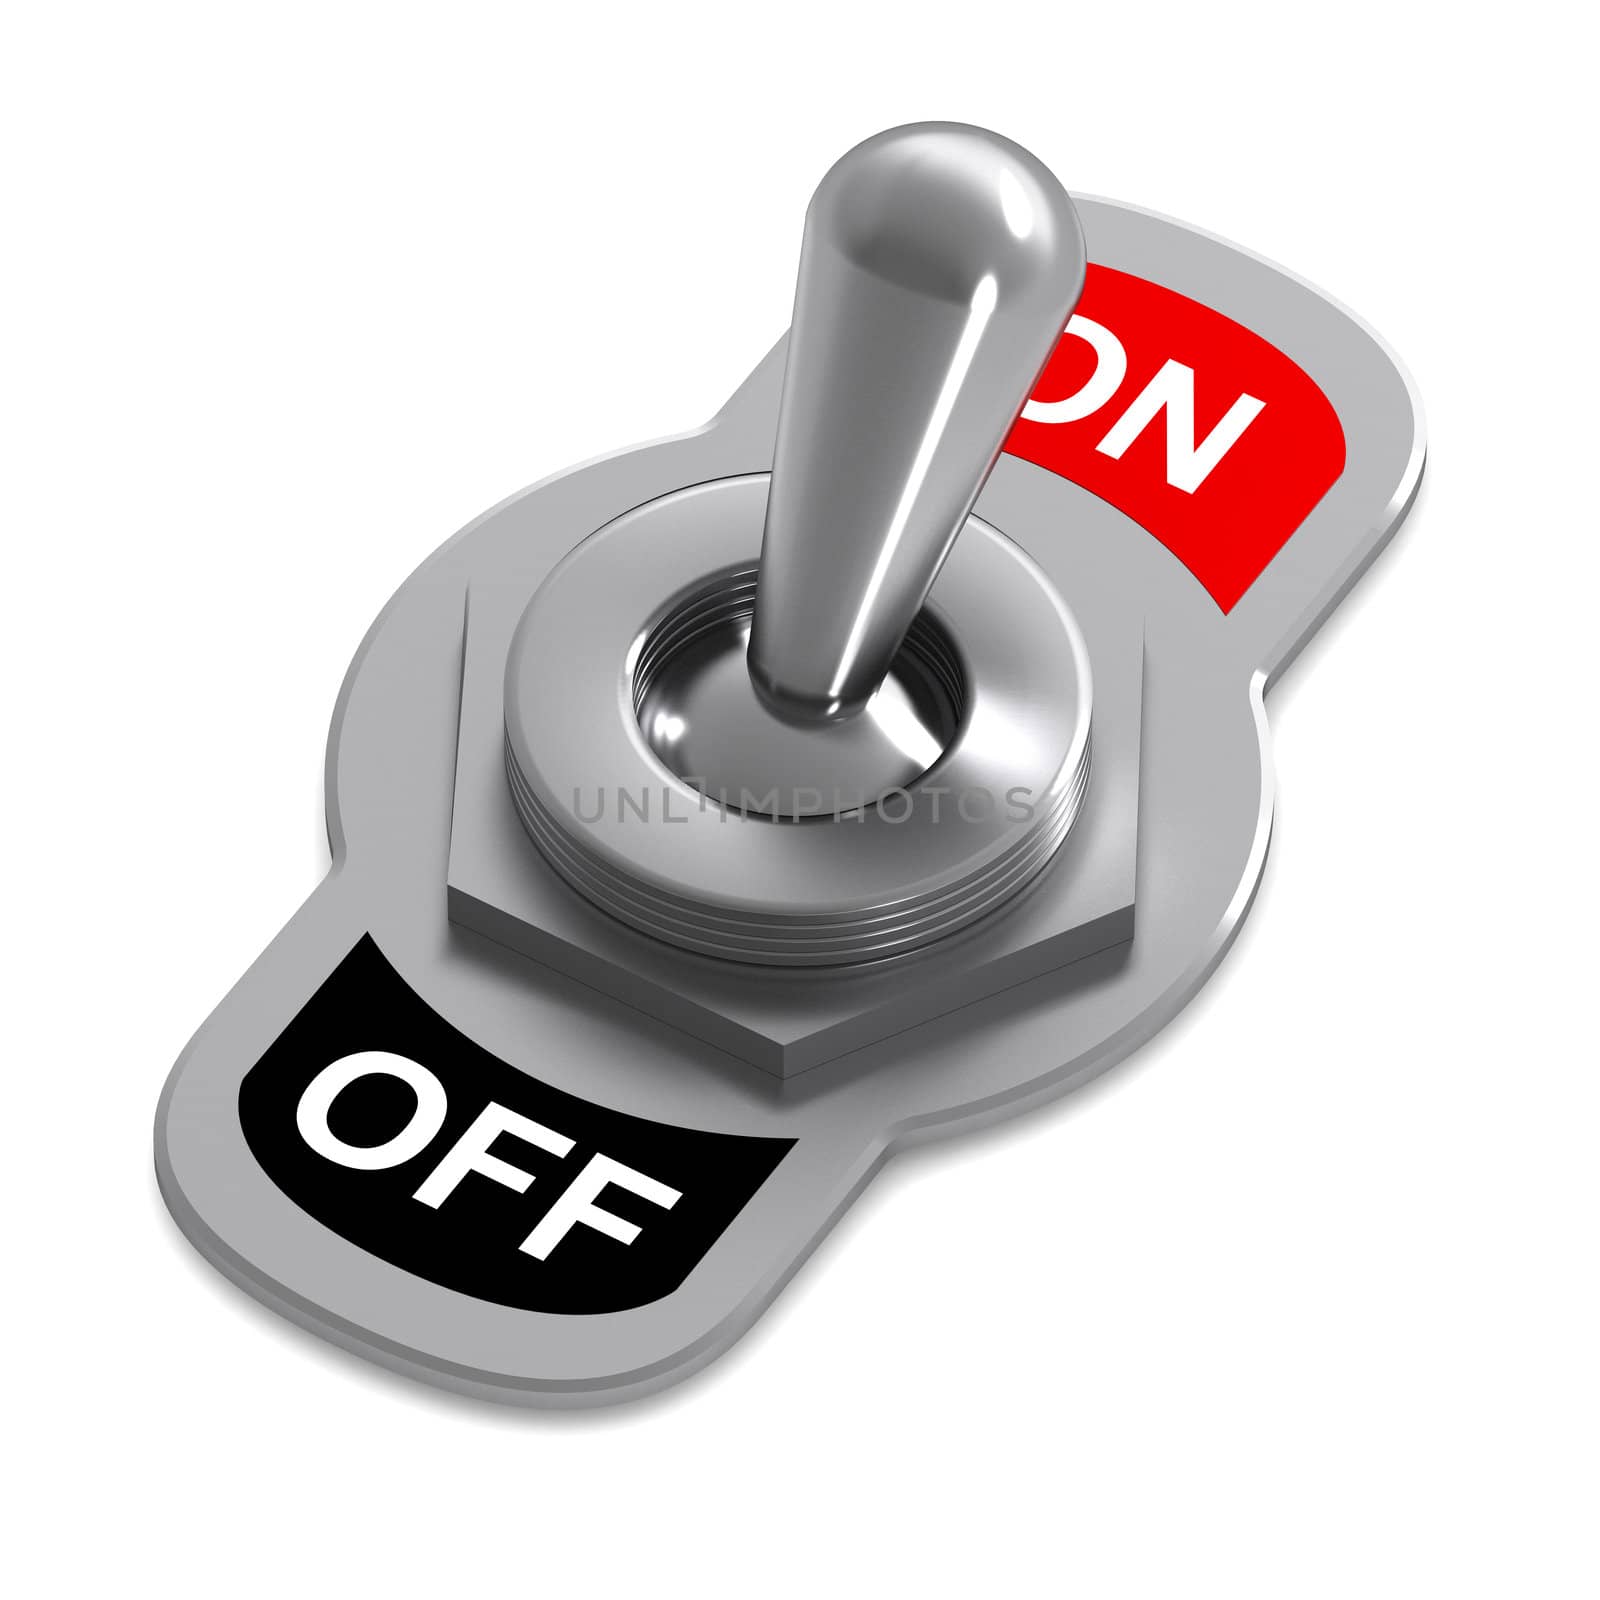 A 3d Rendered Switch Illustration in a 'On' Position